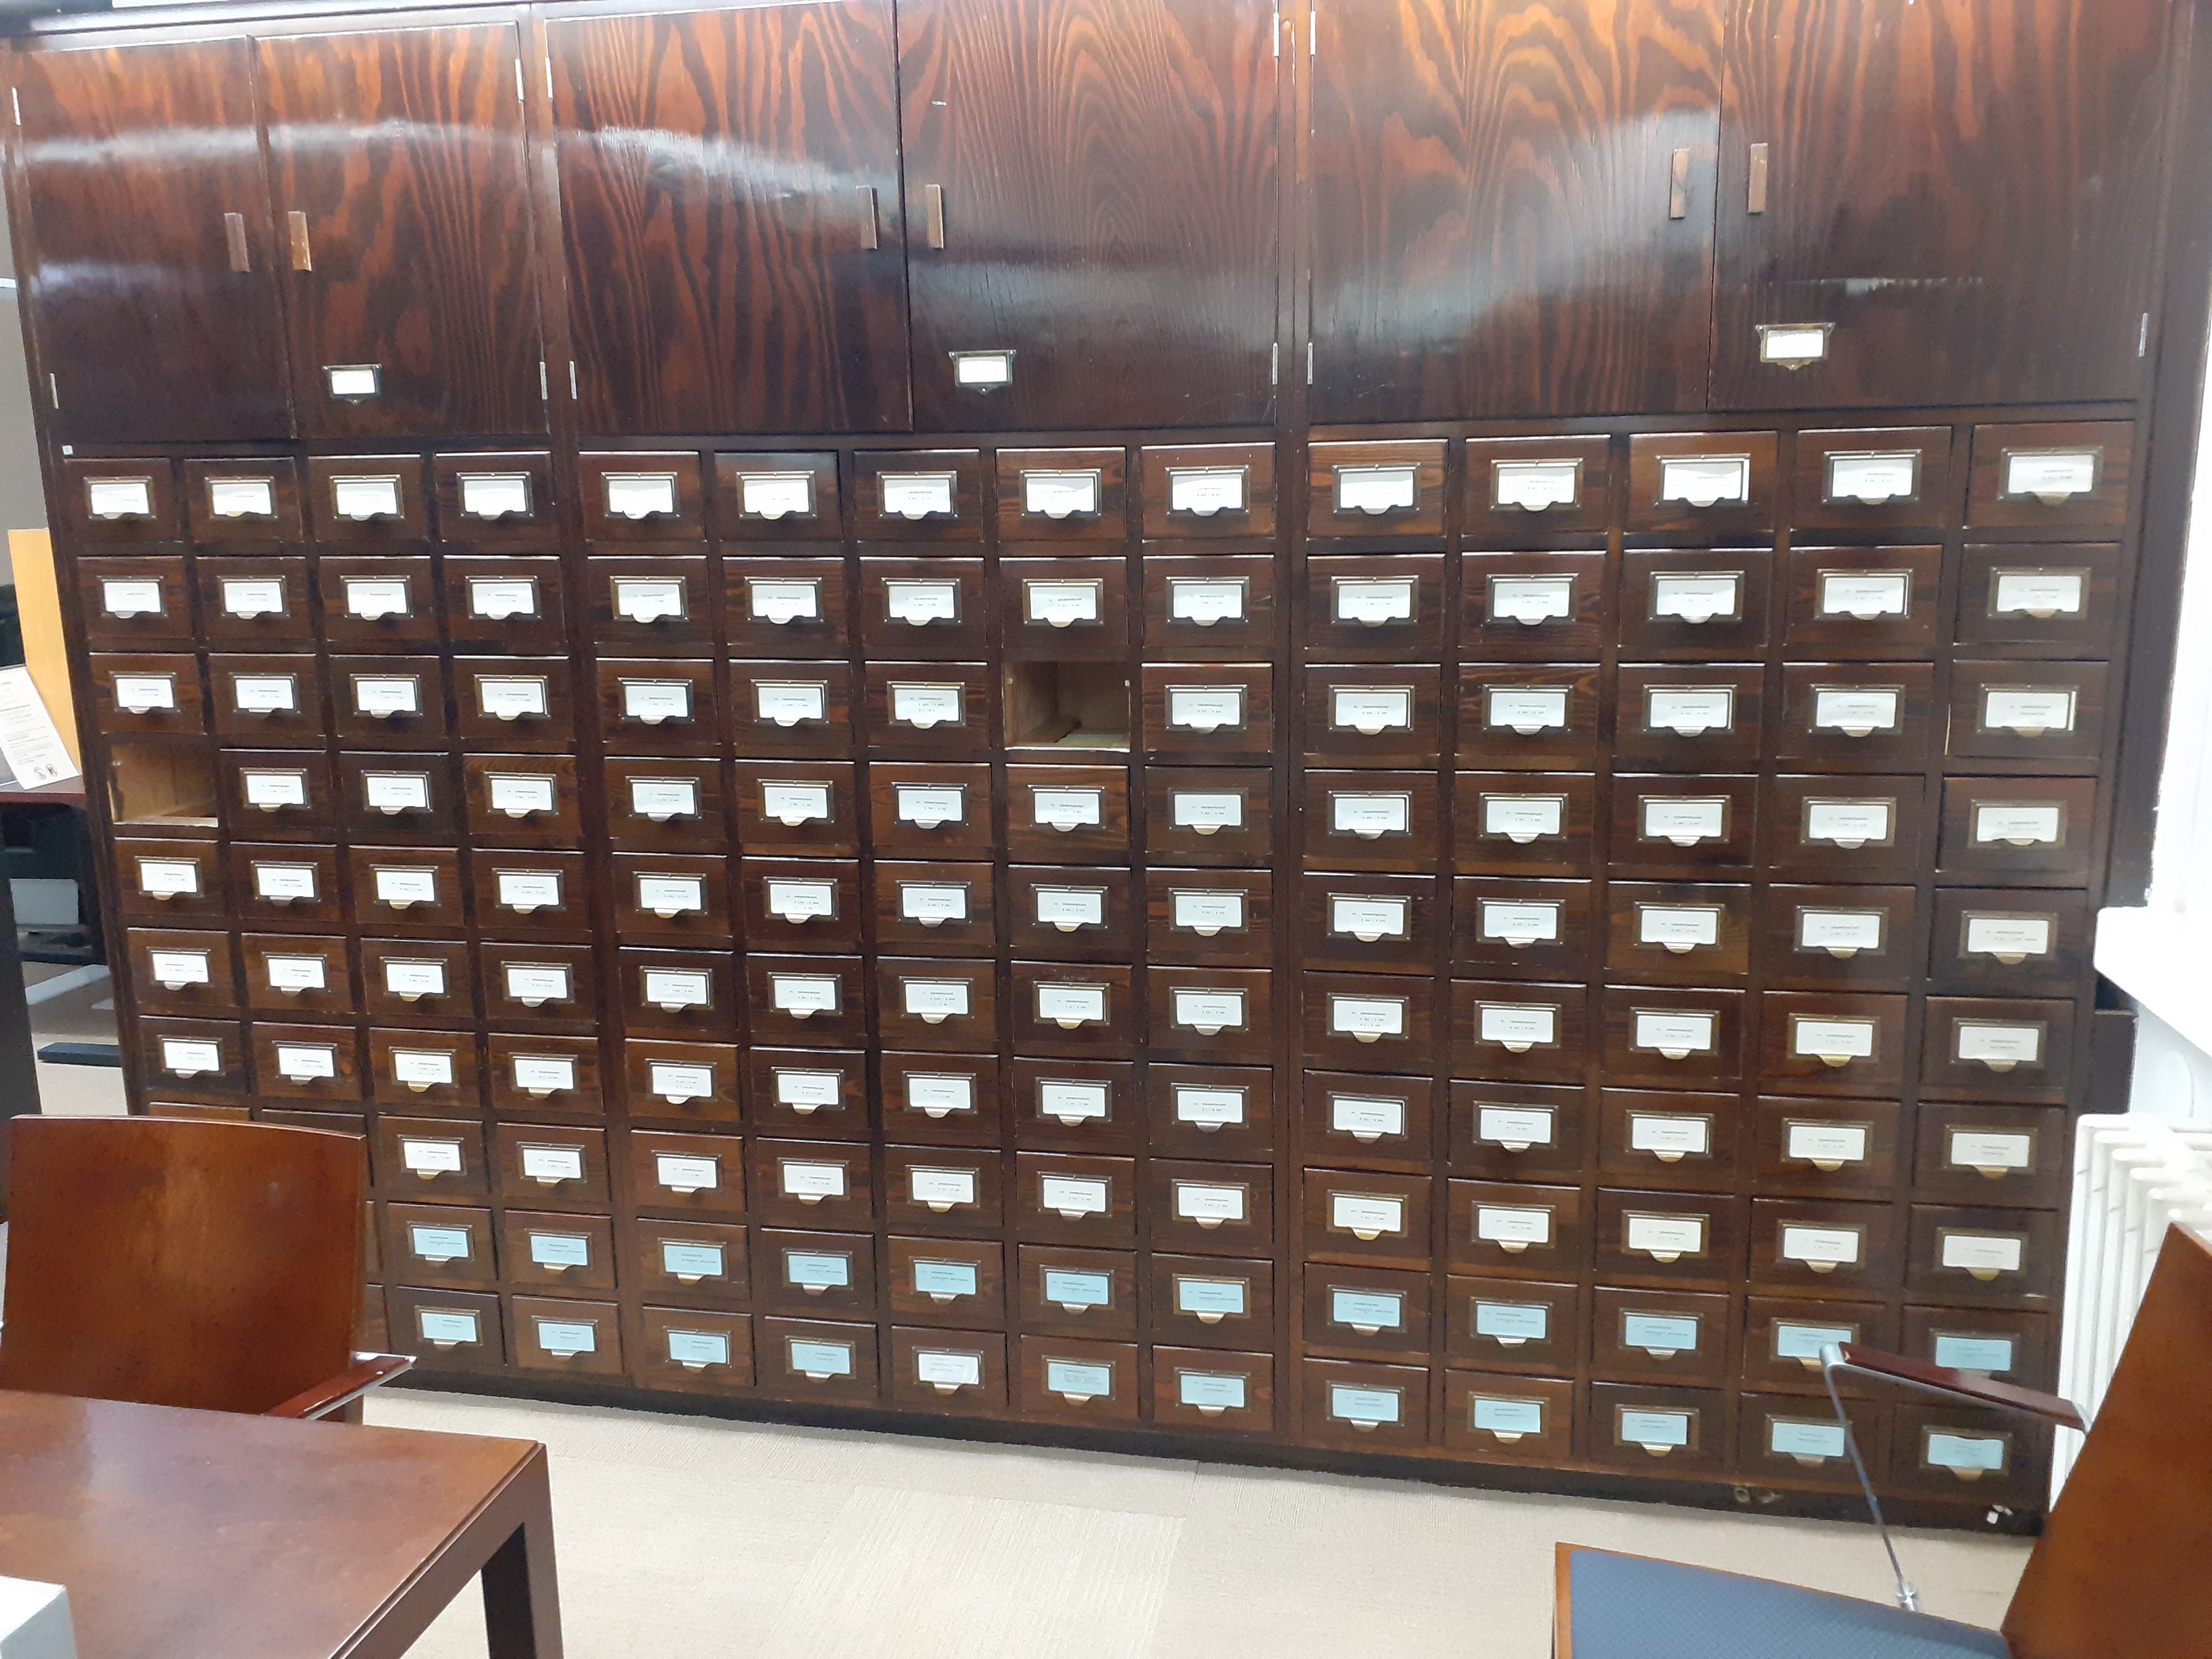 A file card drawer at the SKS archives